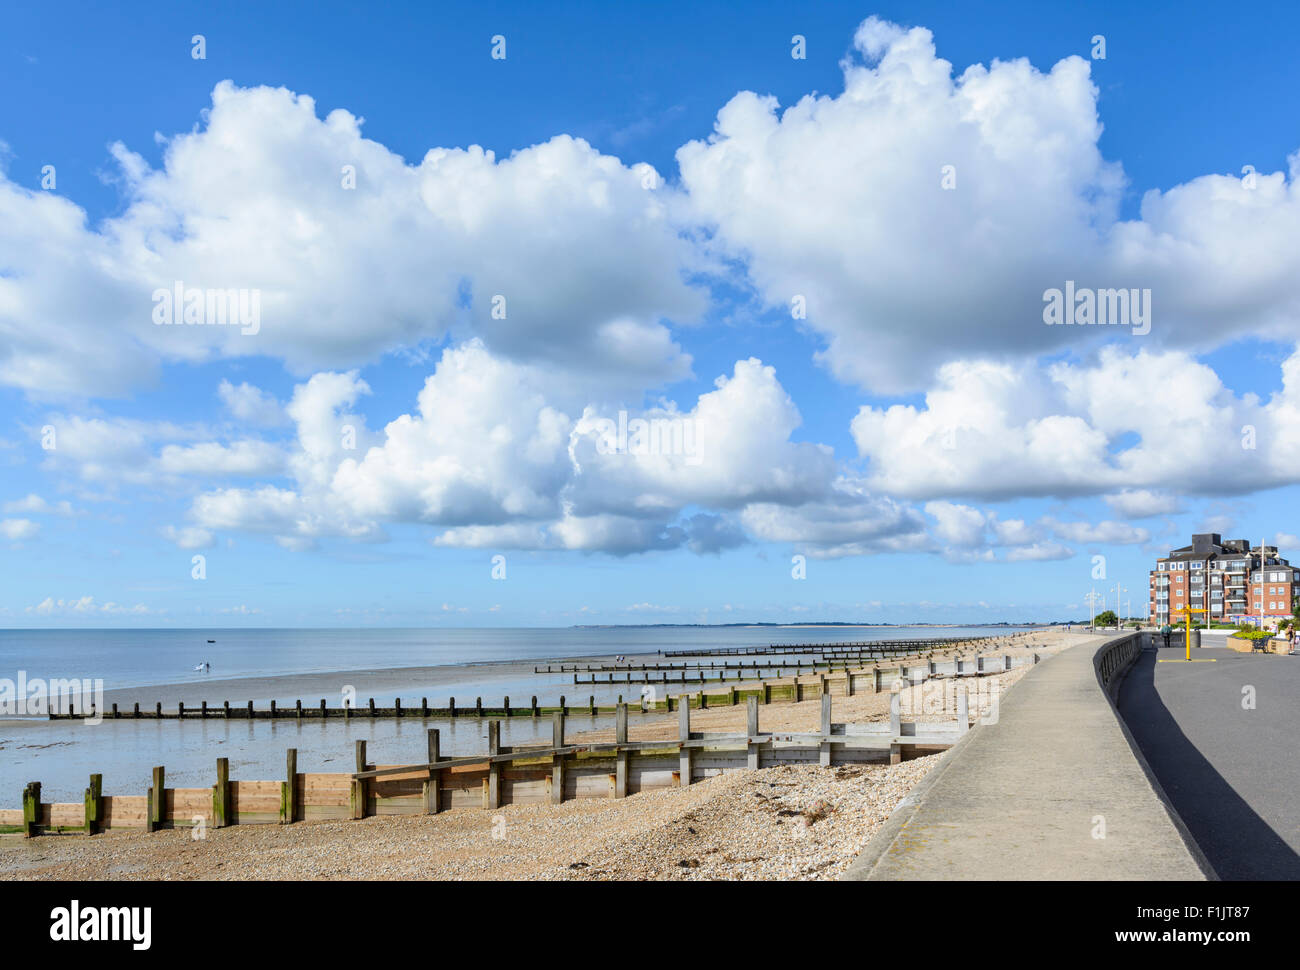 Beach and blue sky with white clouds on the South Coast at Bognor Regis, West Sussex, England, UK. Stock Photo